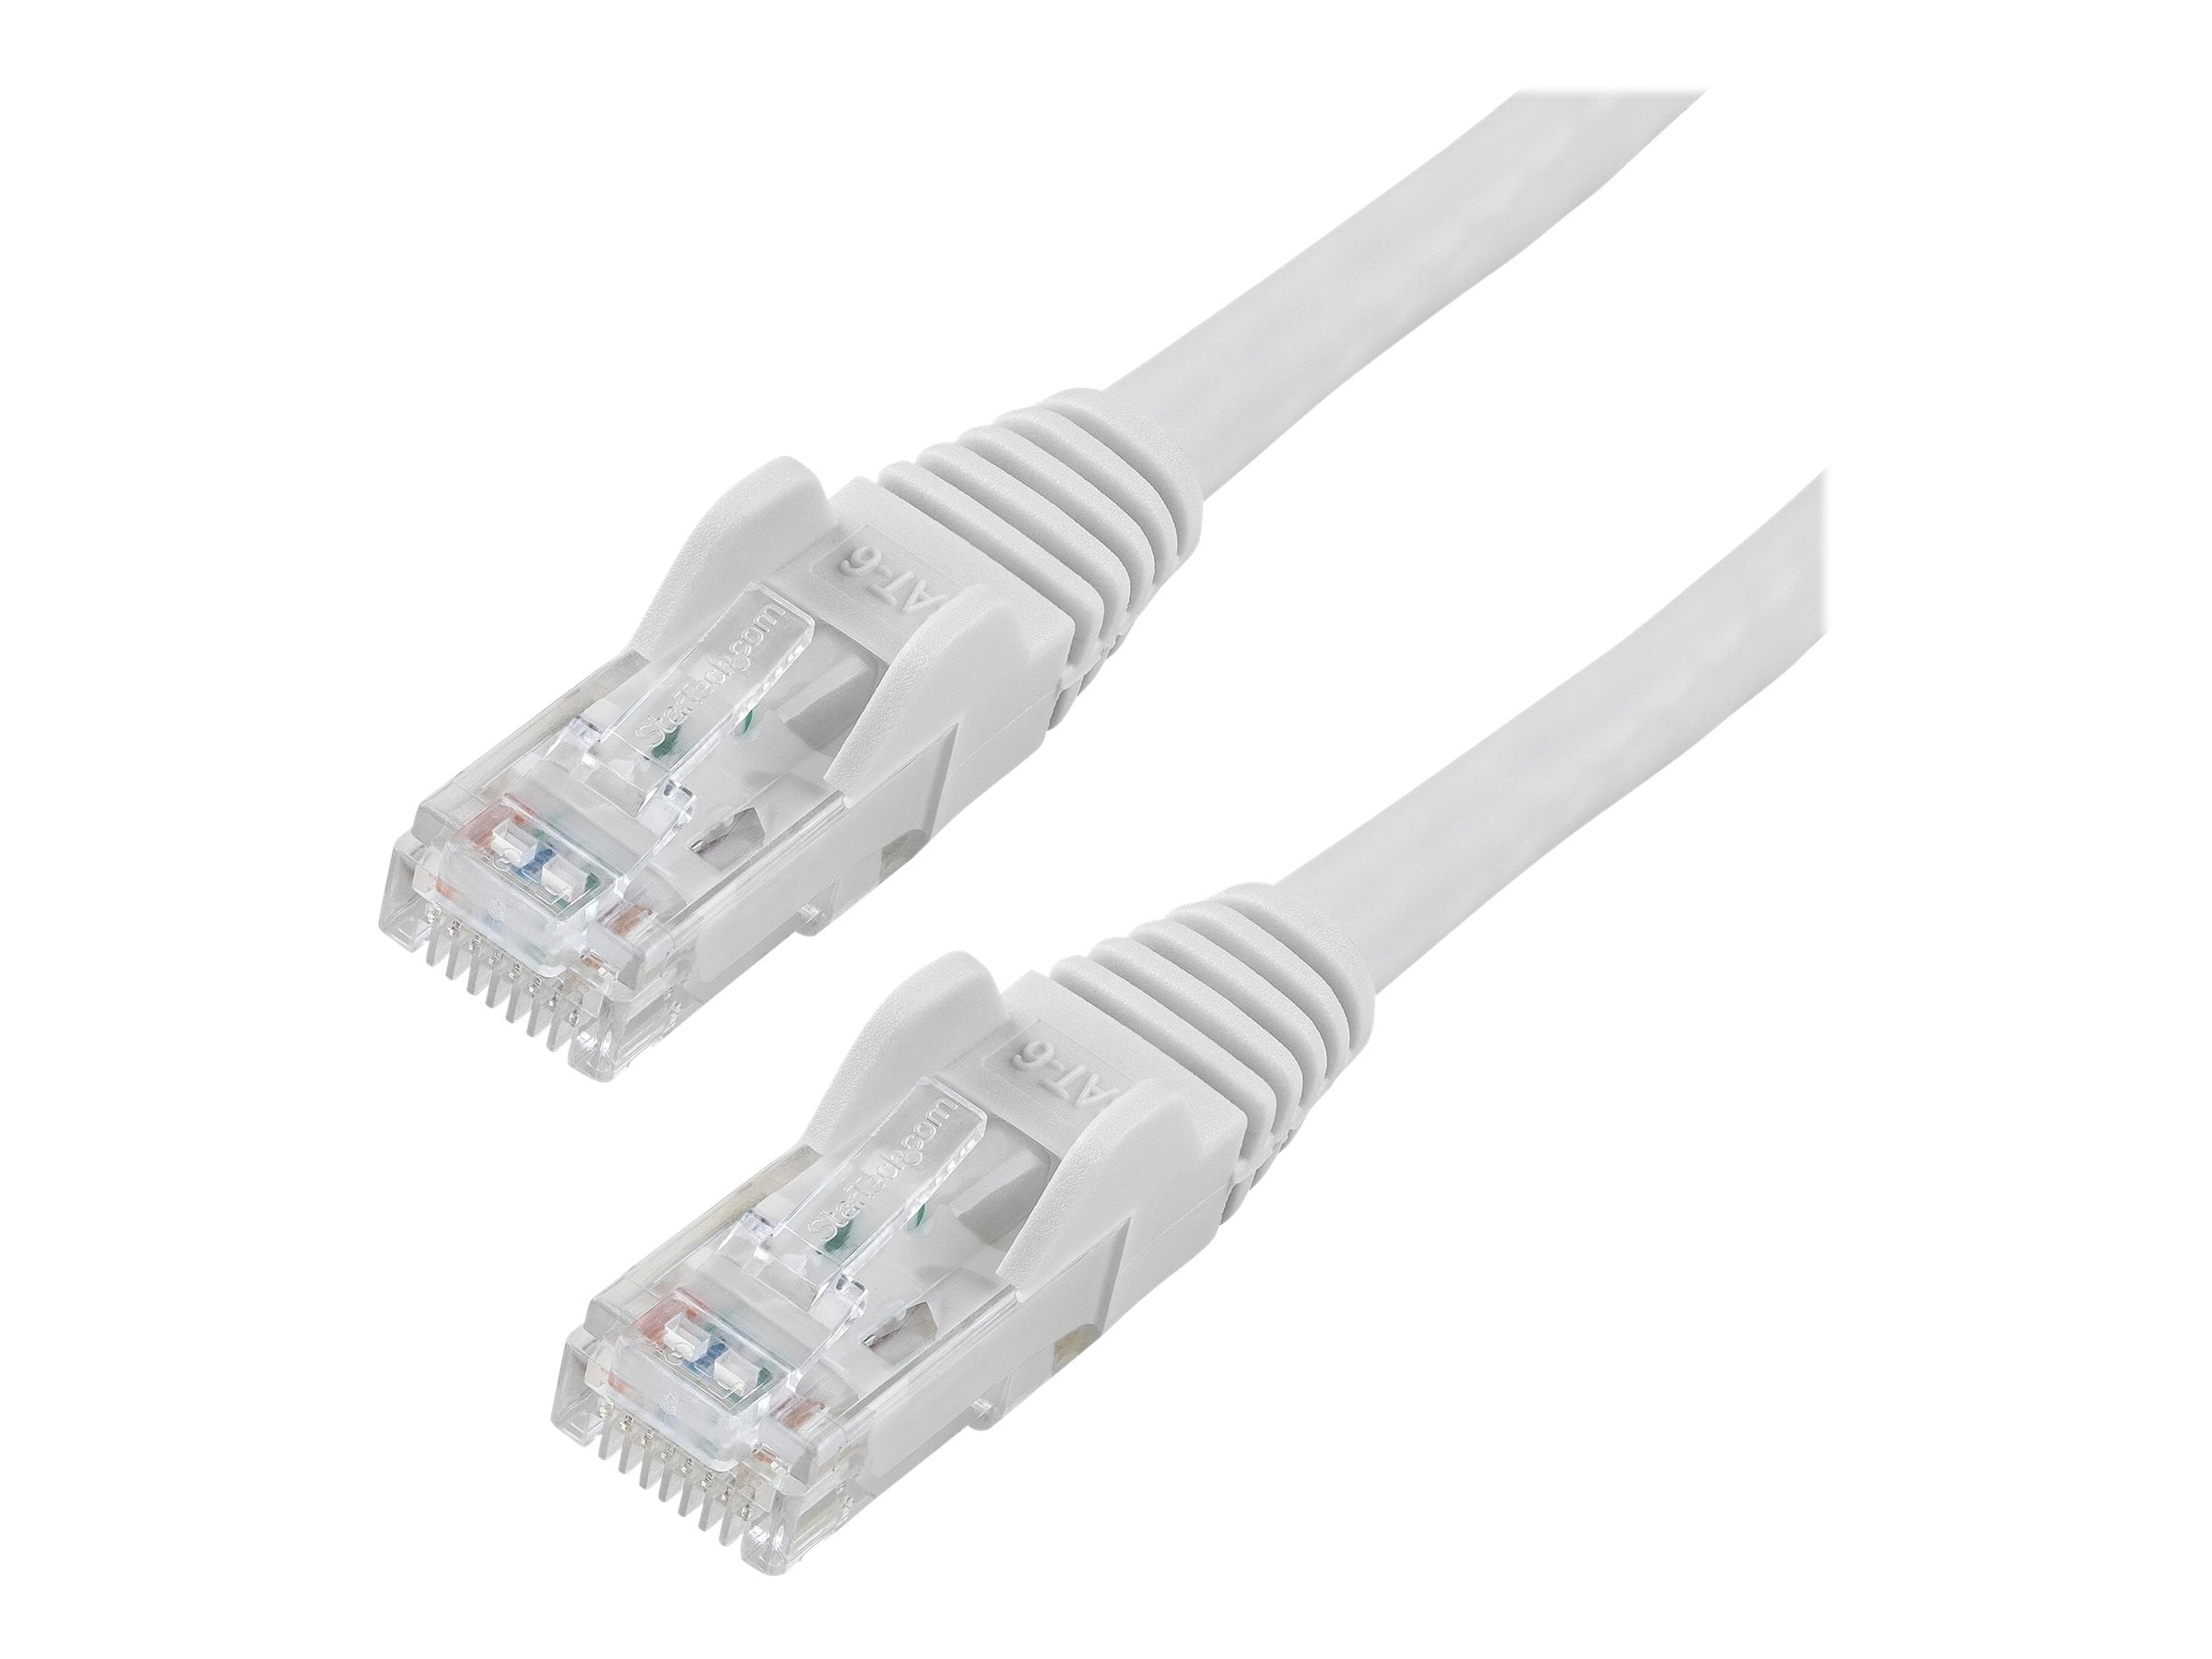 Cable Length: 1m, Color: Metal Yellow Occus RJ45 Ethernet LAN Cable Cat6 0.3m 0.5m 1m Network Yoton Router Patch Cord Cable for Modem Switch PC Xbox Internet